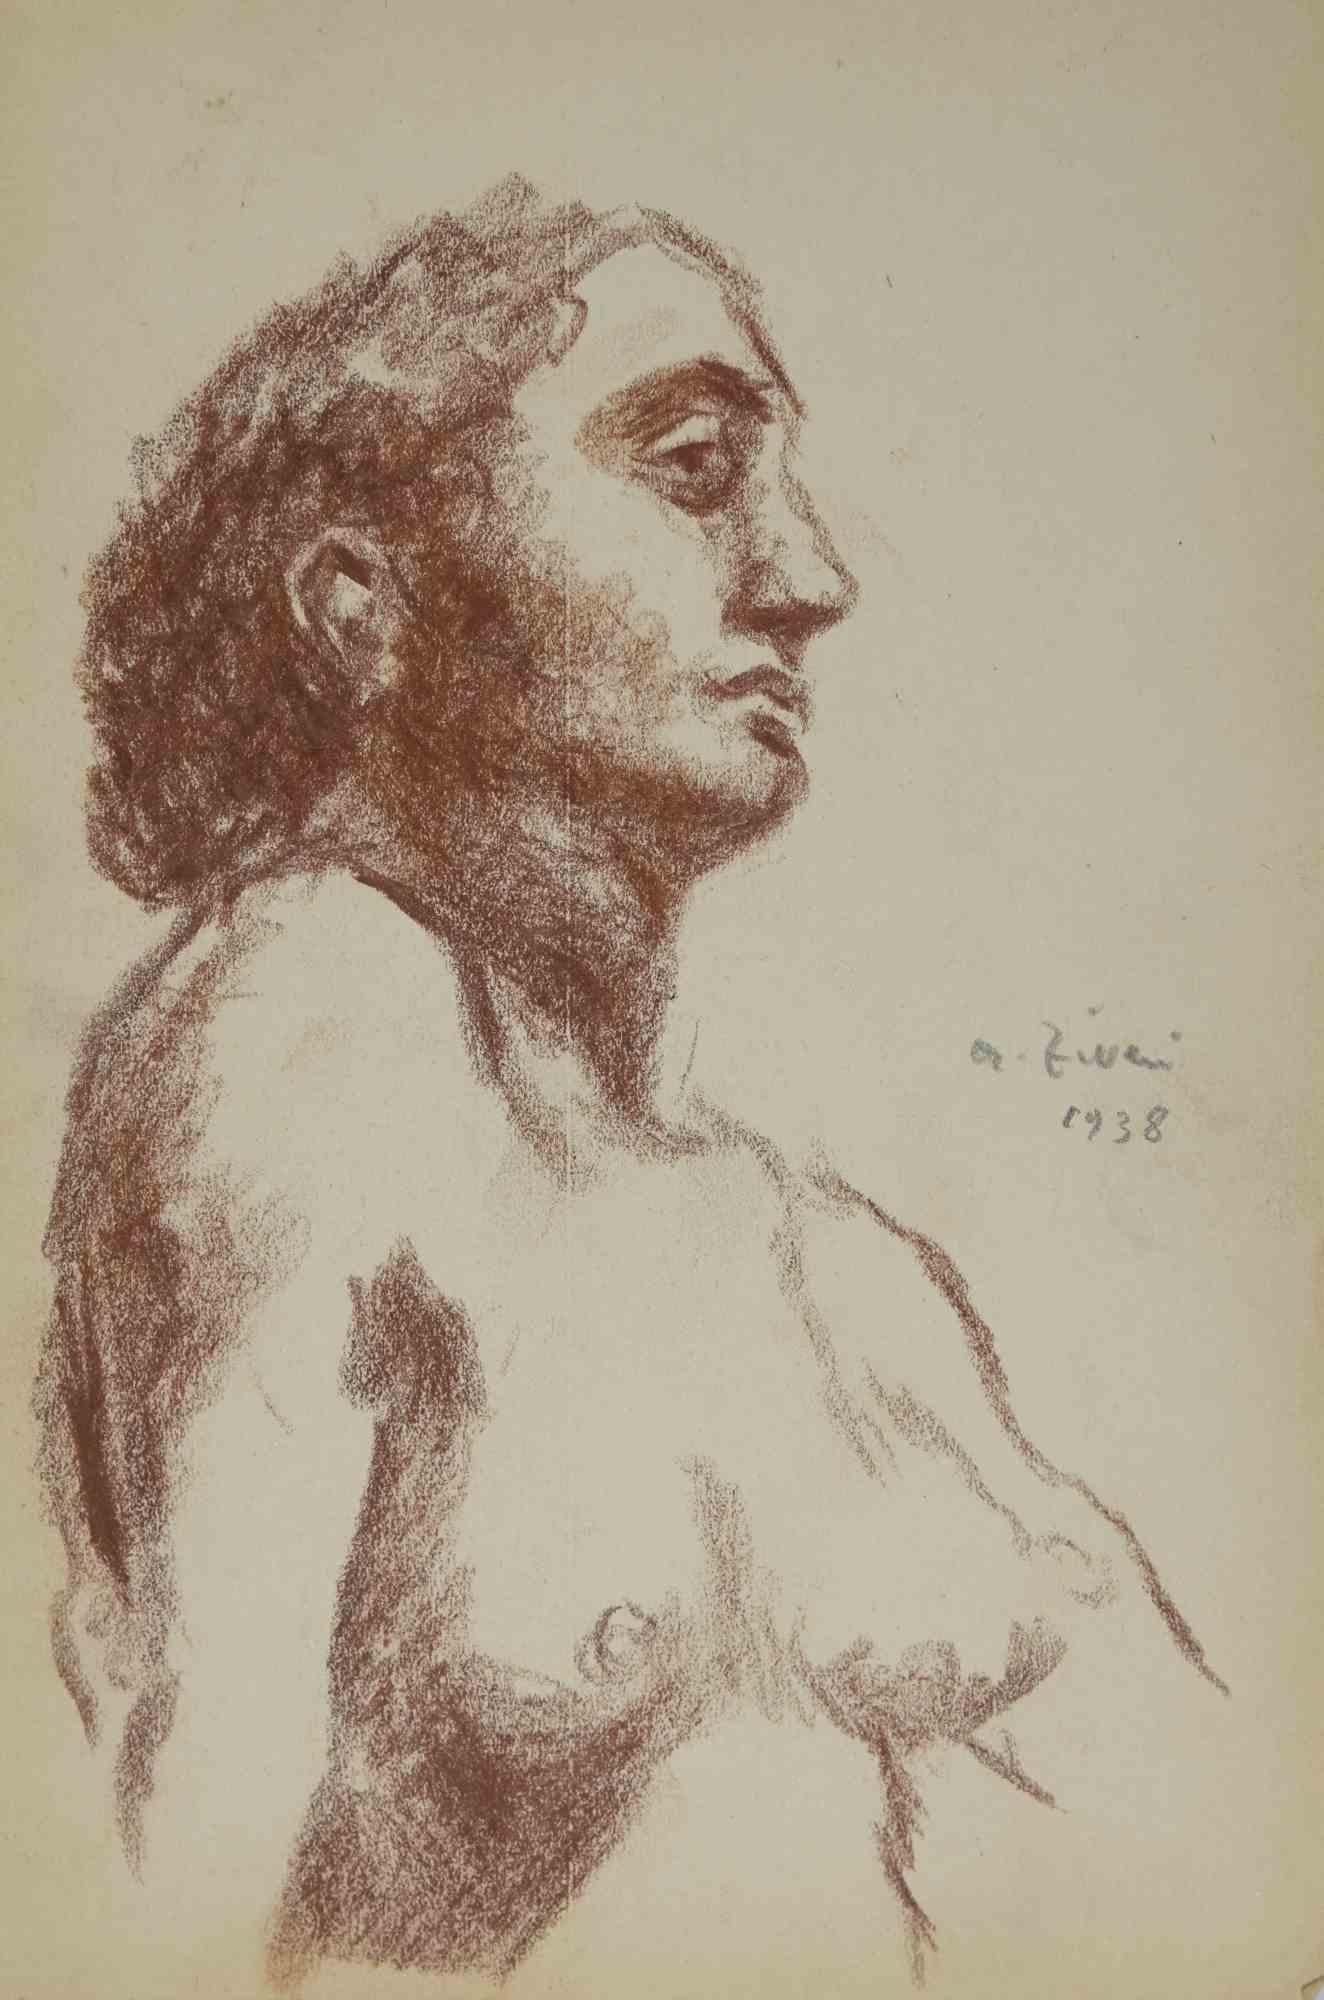 Portrait is a drawing realized by Alberto Ziveri in 1938.

Oil Pastel on paper.

Hand-signed and dated.

In good conditions.

The artwork is represented through deft strokes masterly.

Alberto Ziveri (Rome,1908 – 1990), the Italian painter of the